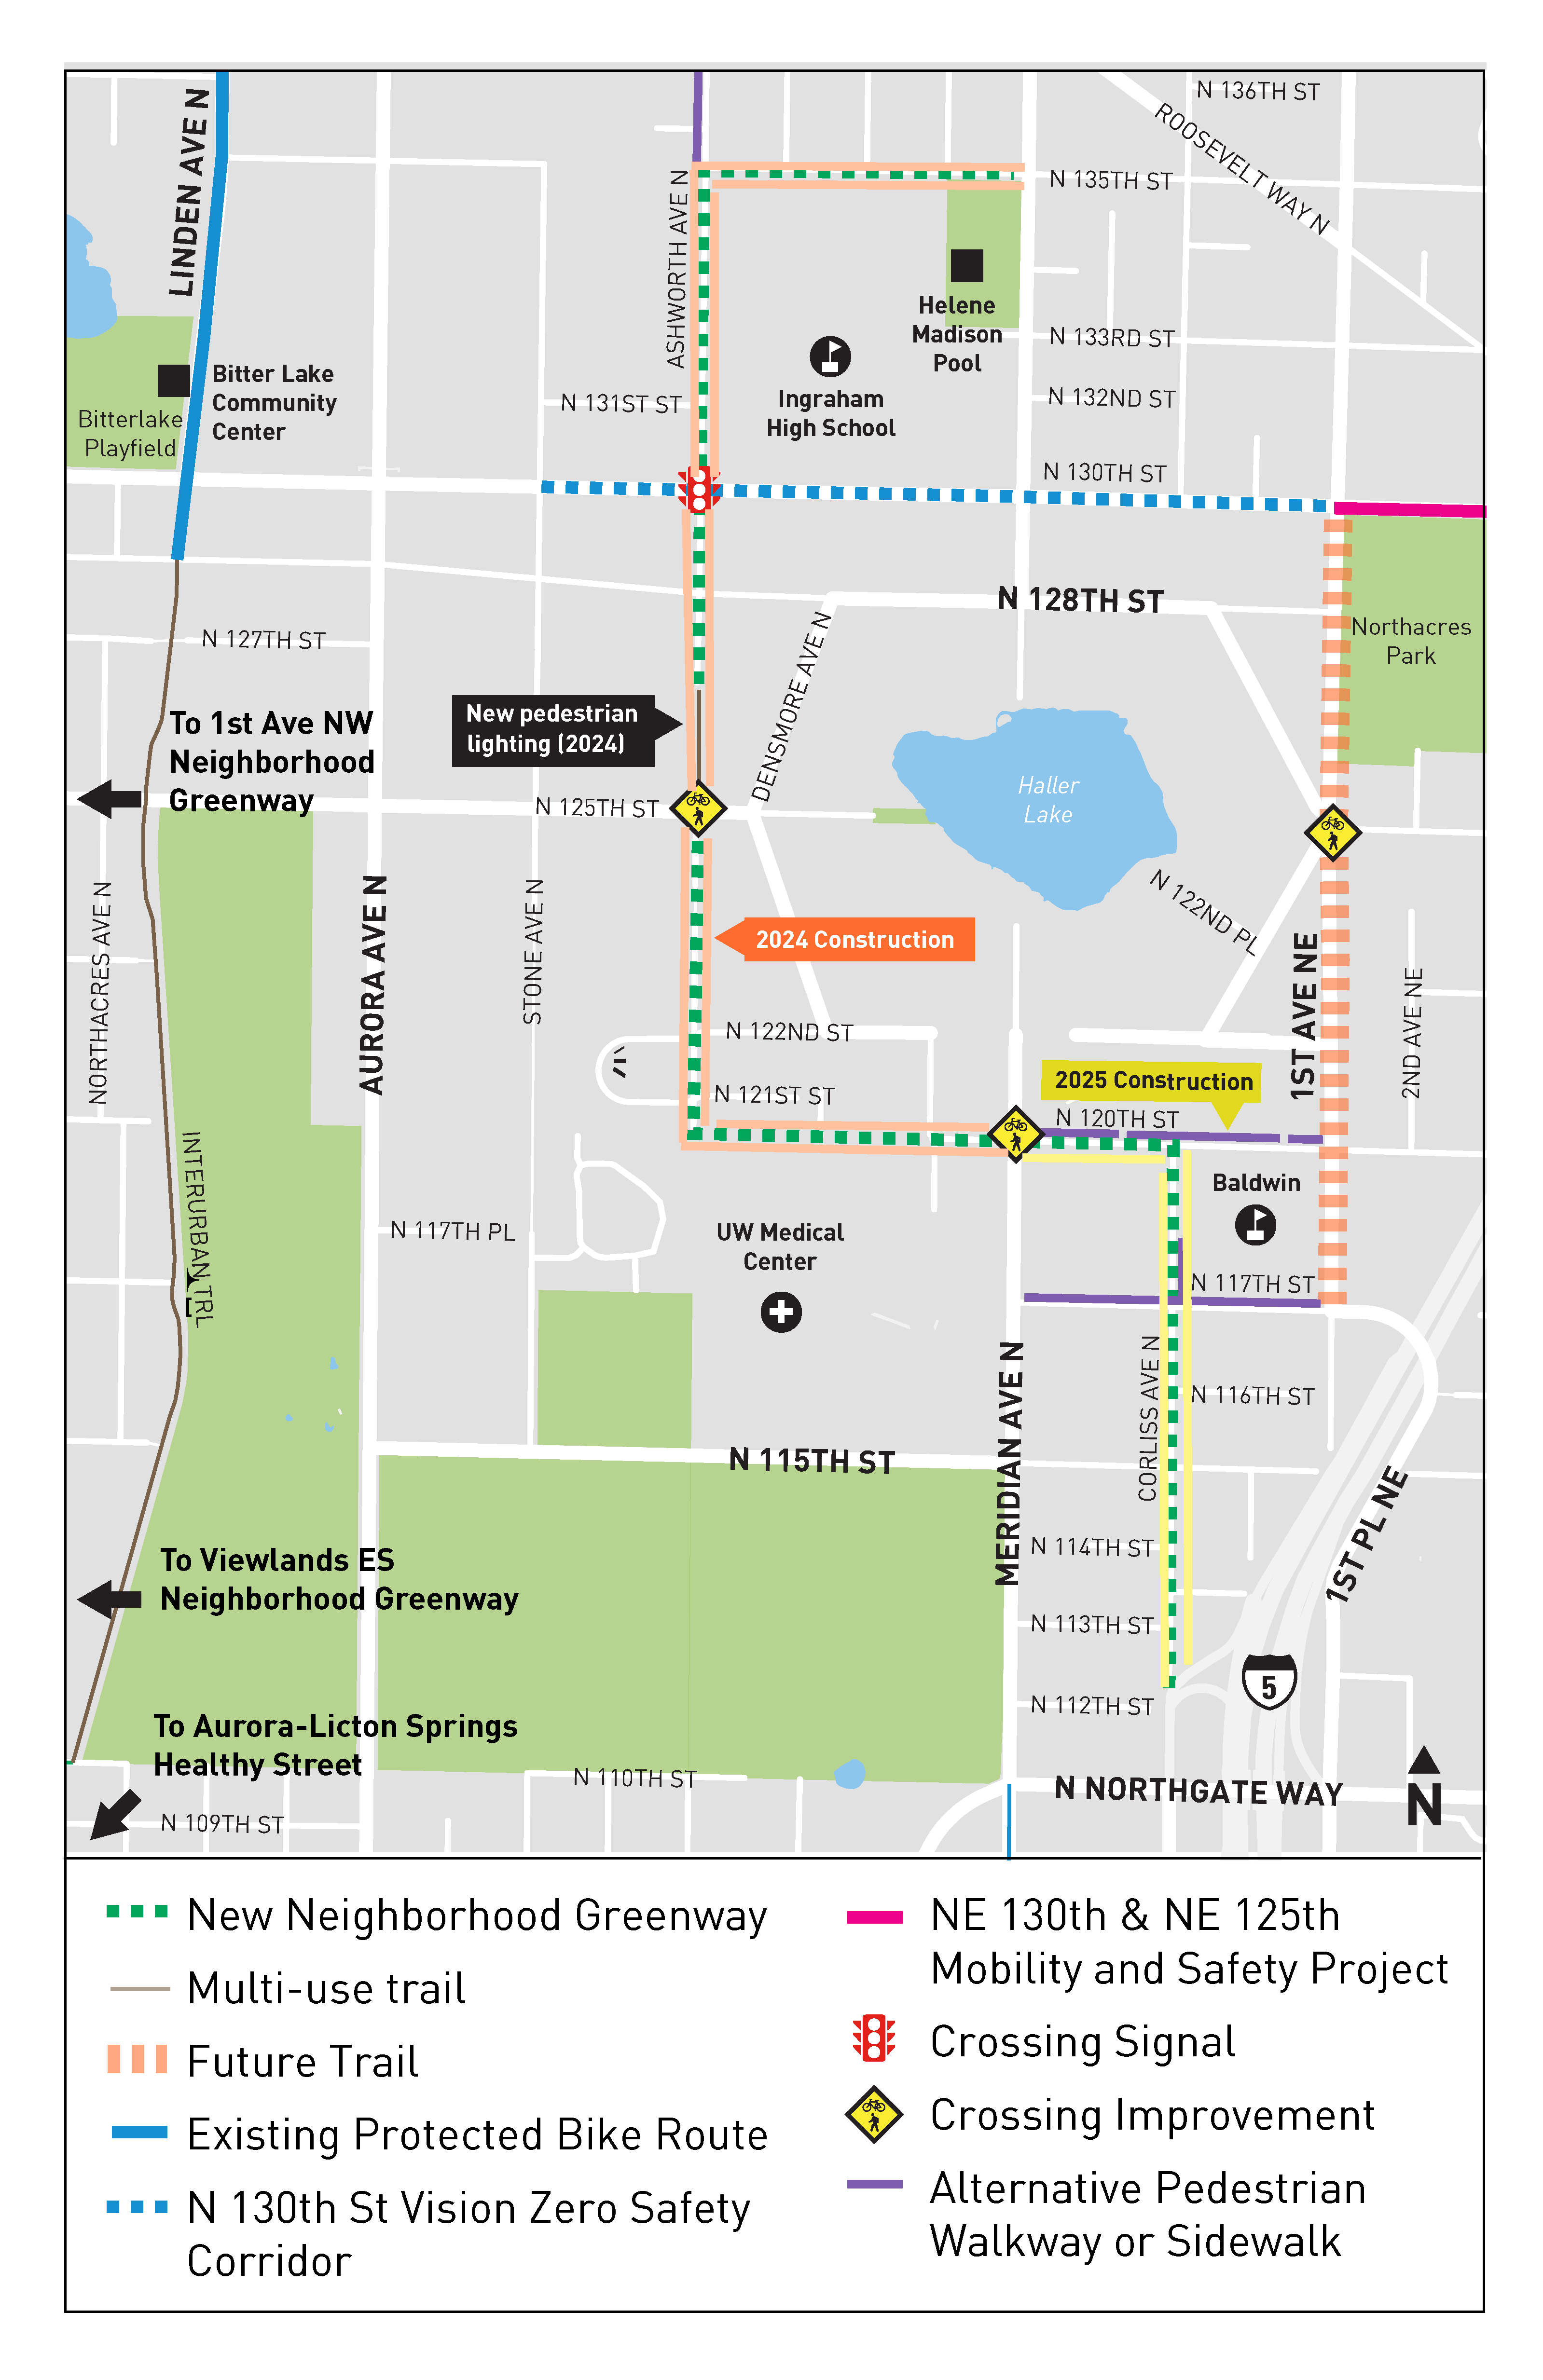 A map showing the Greenway route from Northgate Elementary School and Ingraham High School along Corliss Ave N to N 120th St to Ashworth Ave N